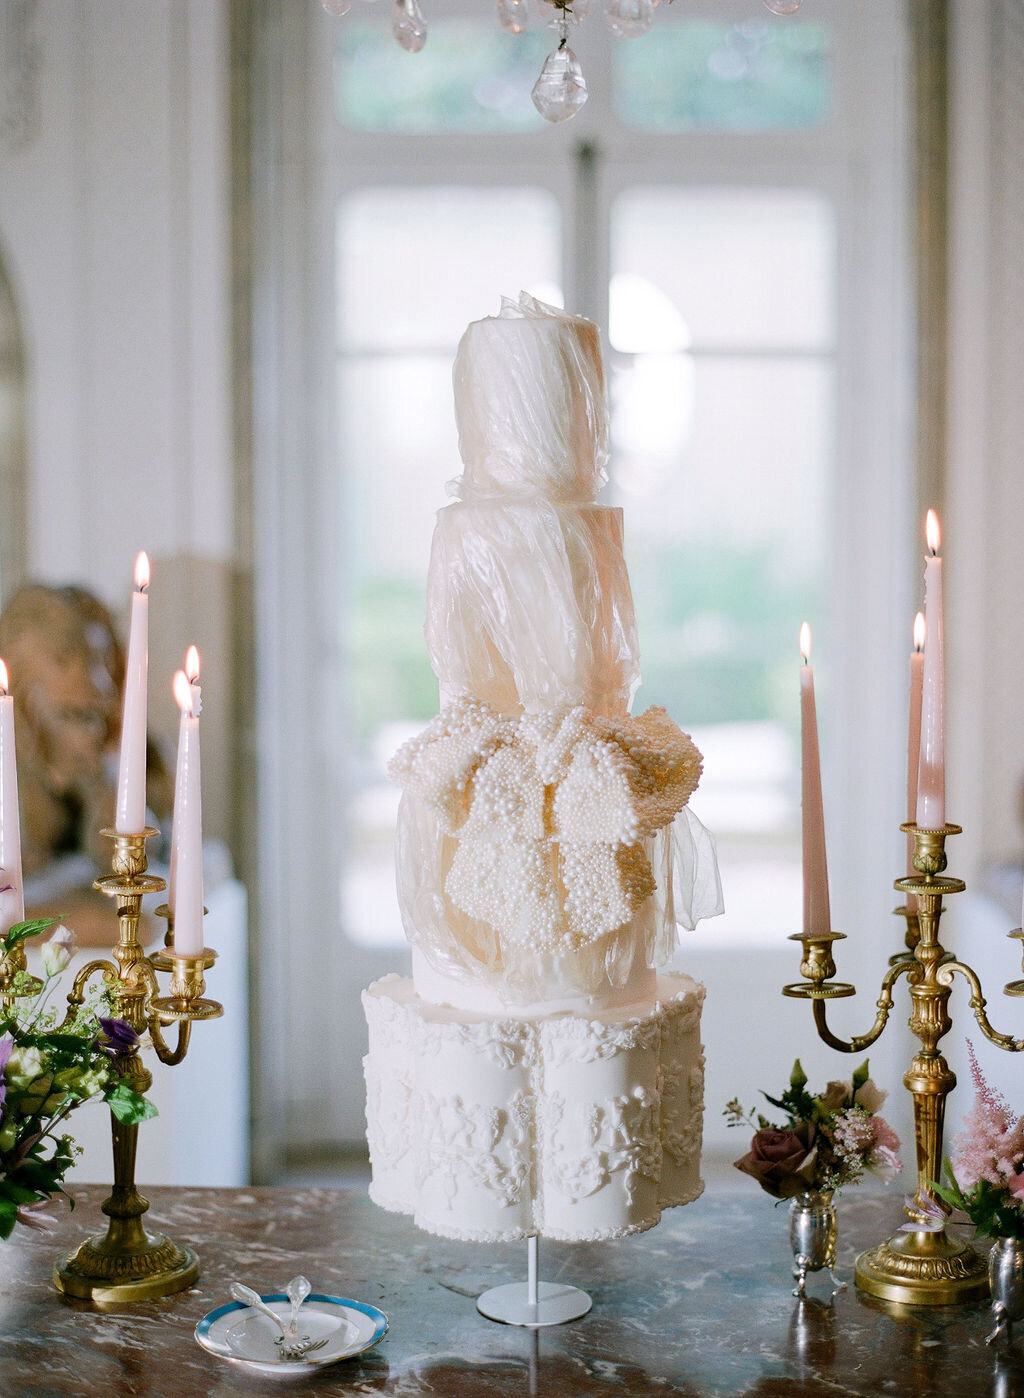 Molly-Carr-Photography-Versailles-Cake-Champagne-12